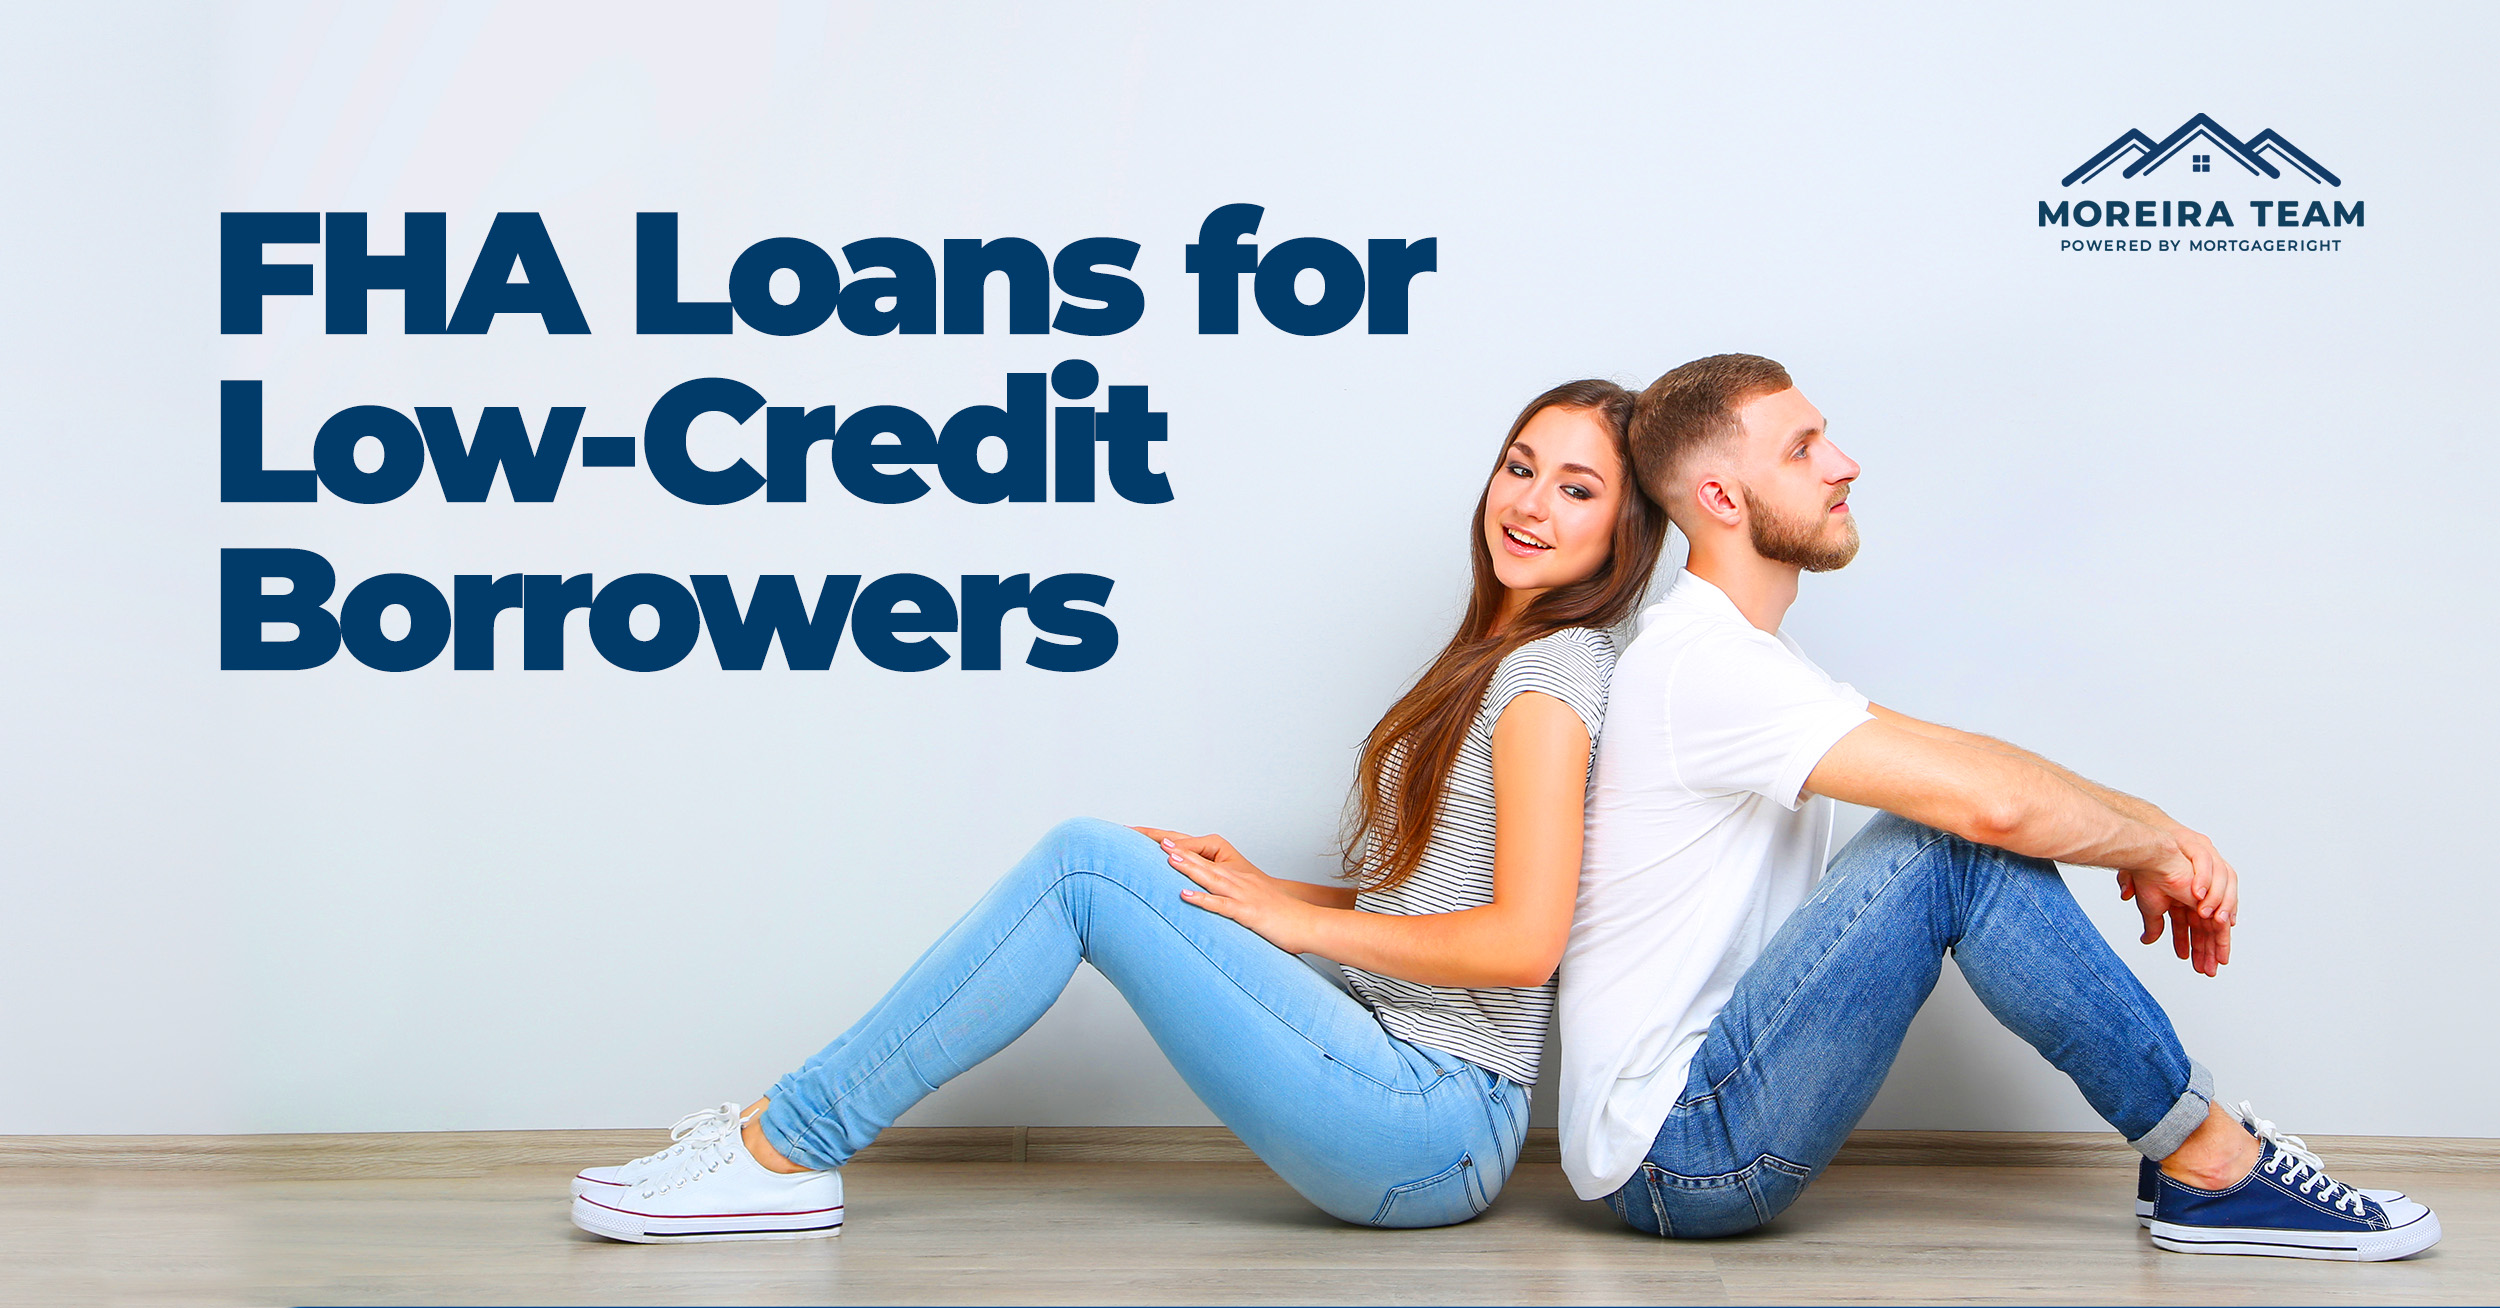 FHA Loans for Low-Credit Borrowers